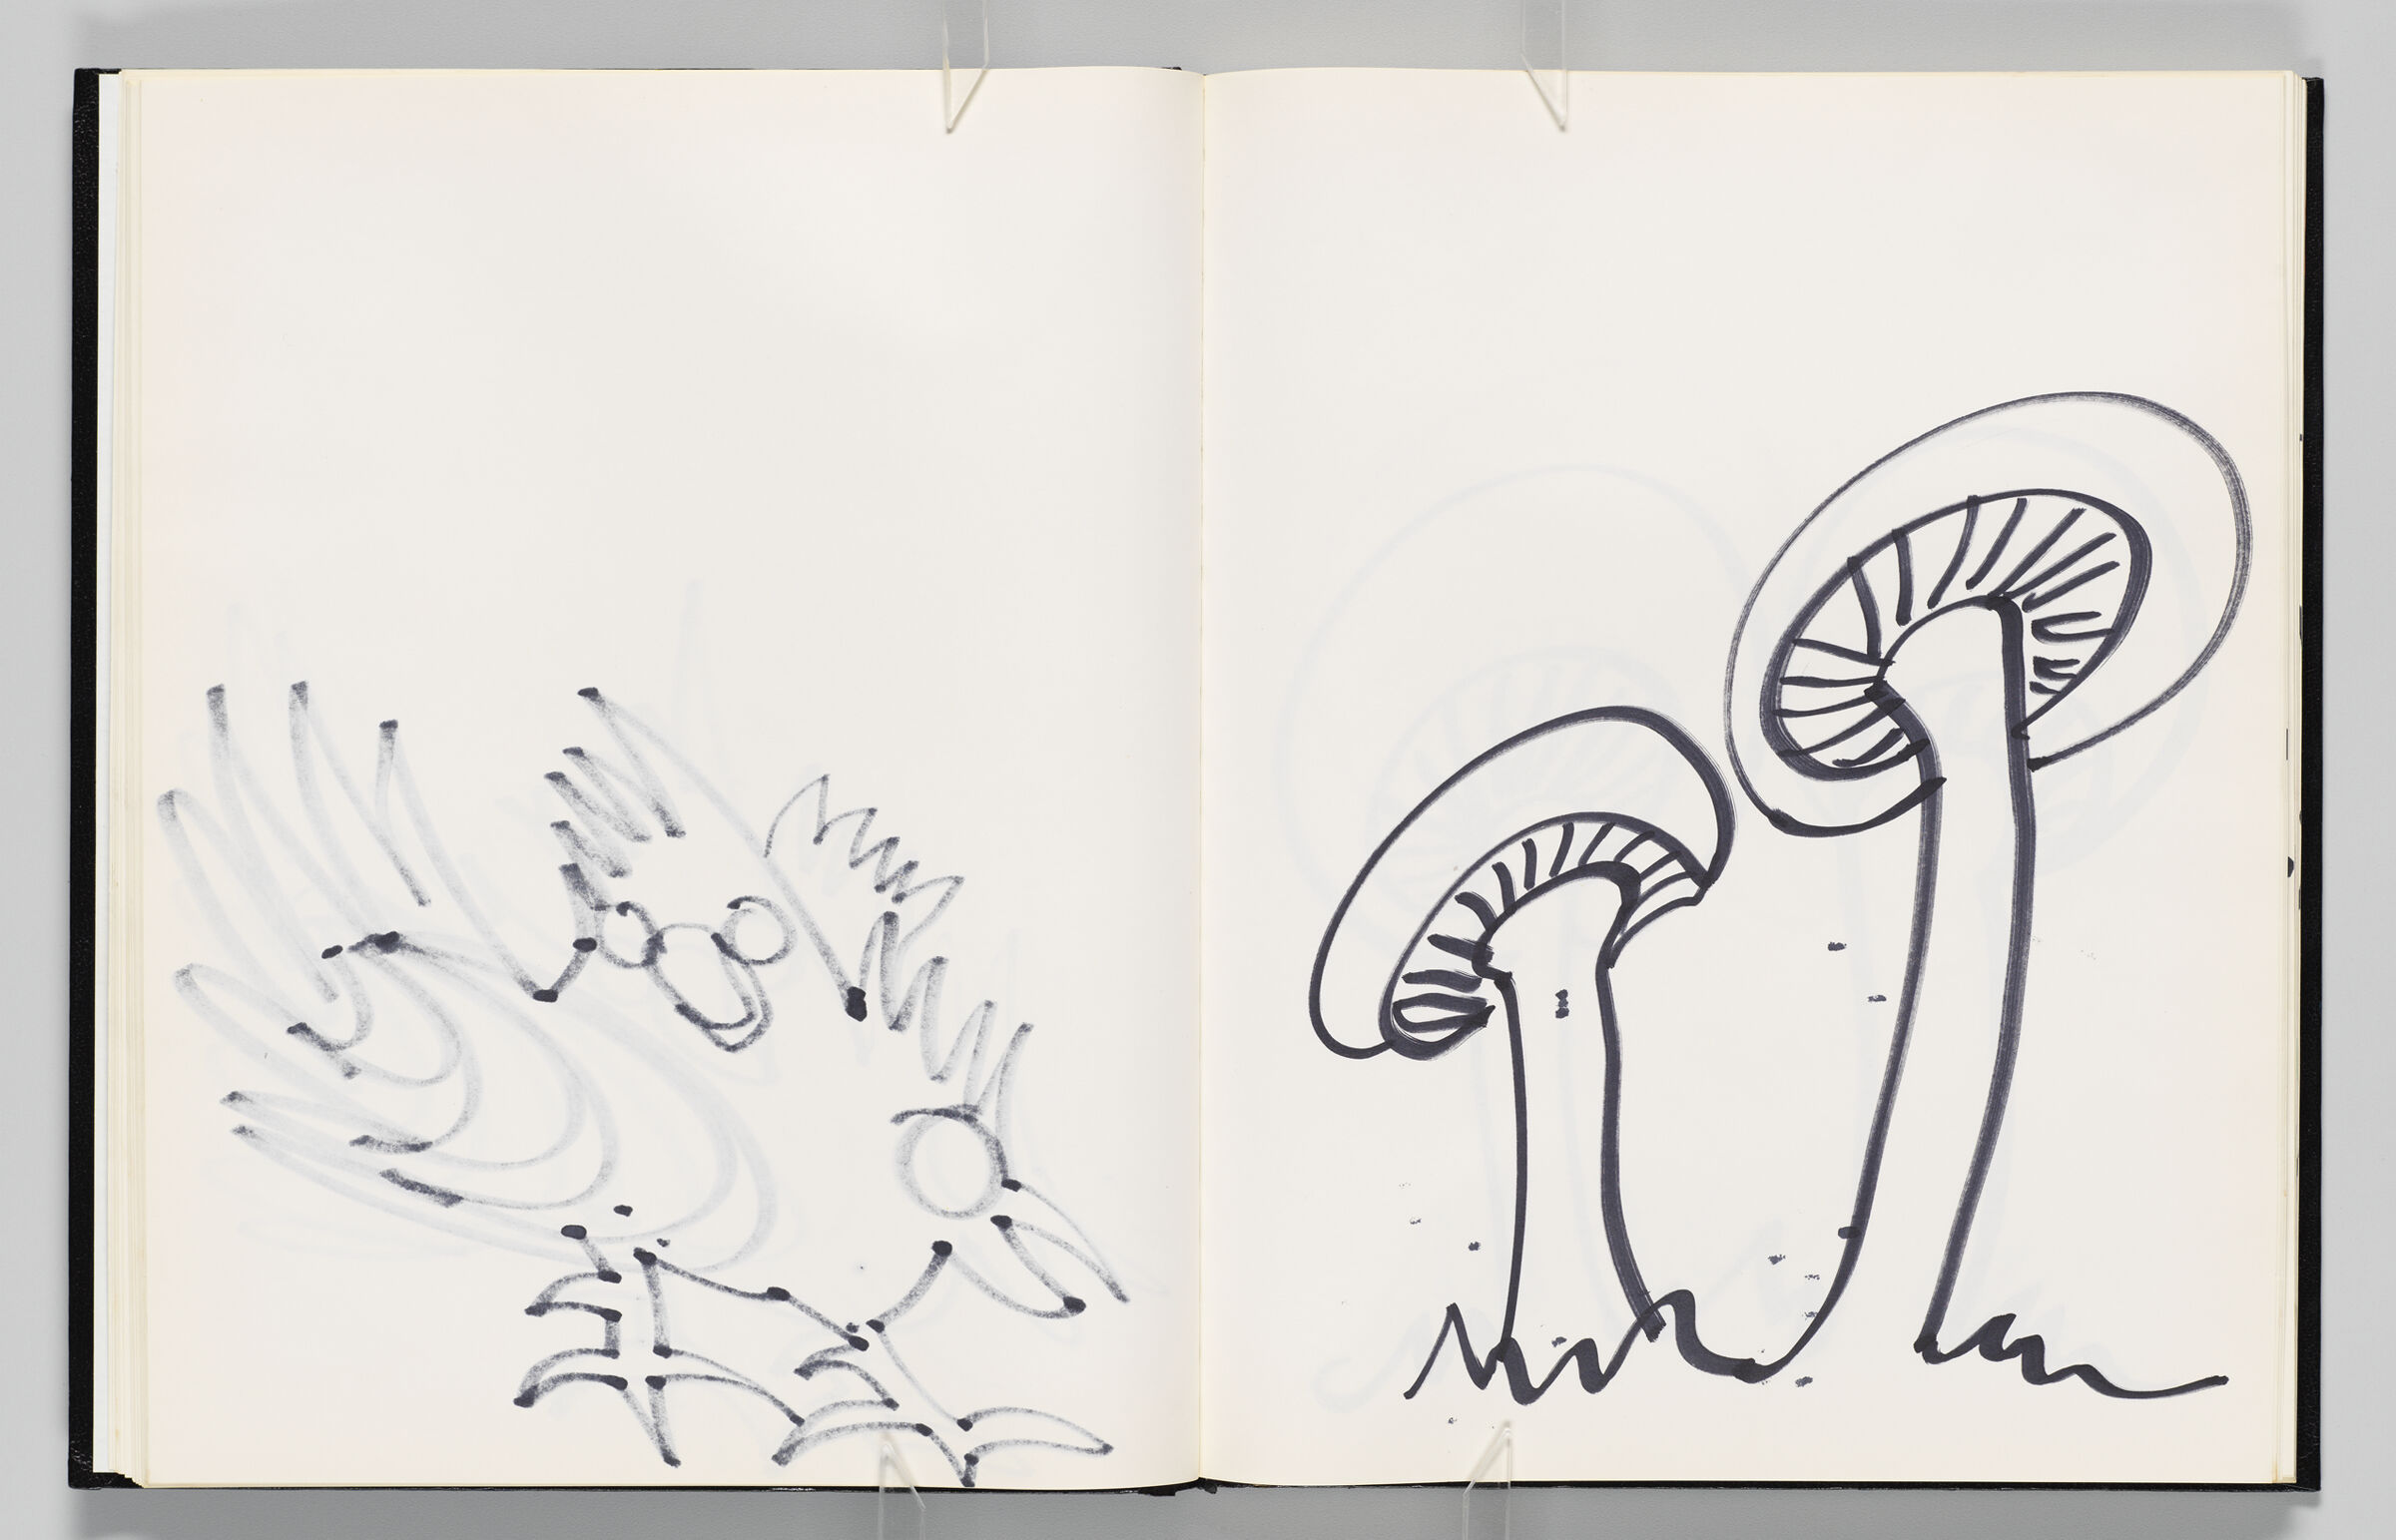 Untitled (Bleed-Through Of Previous Page, Left Page); Untitled (Mushrooms, Right Page)